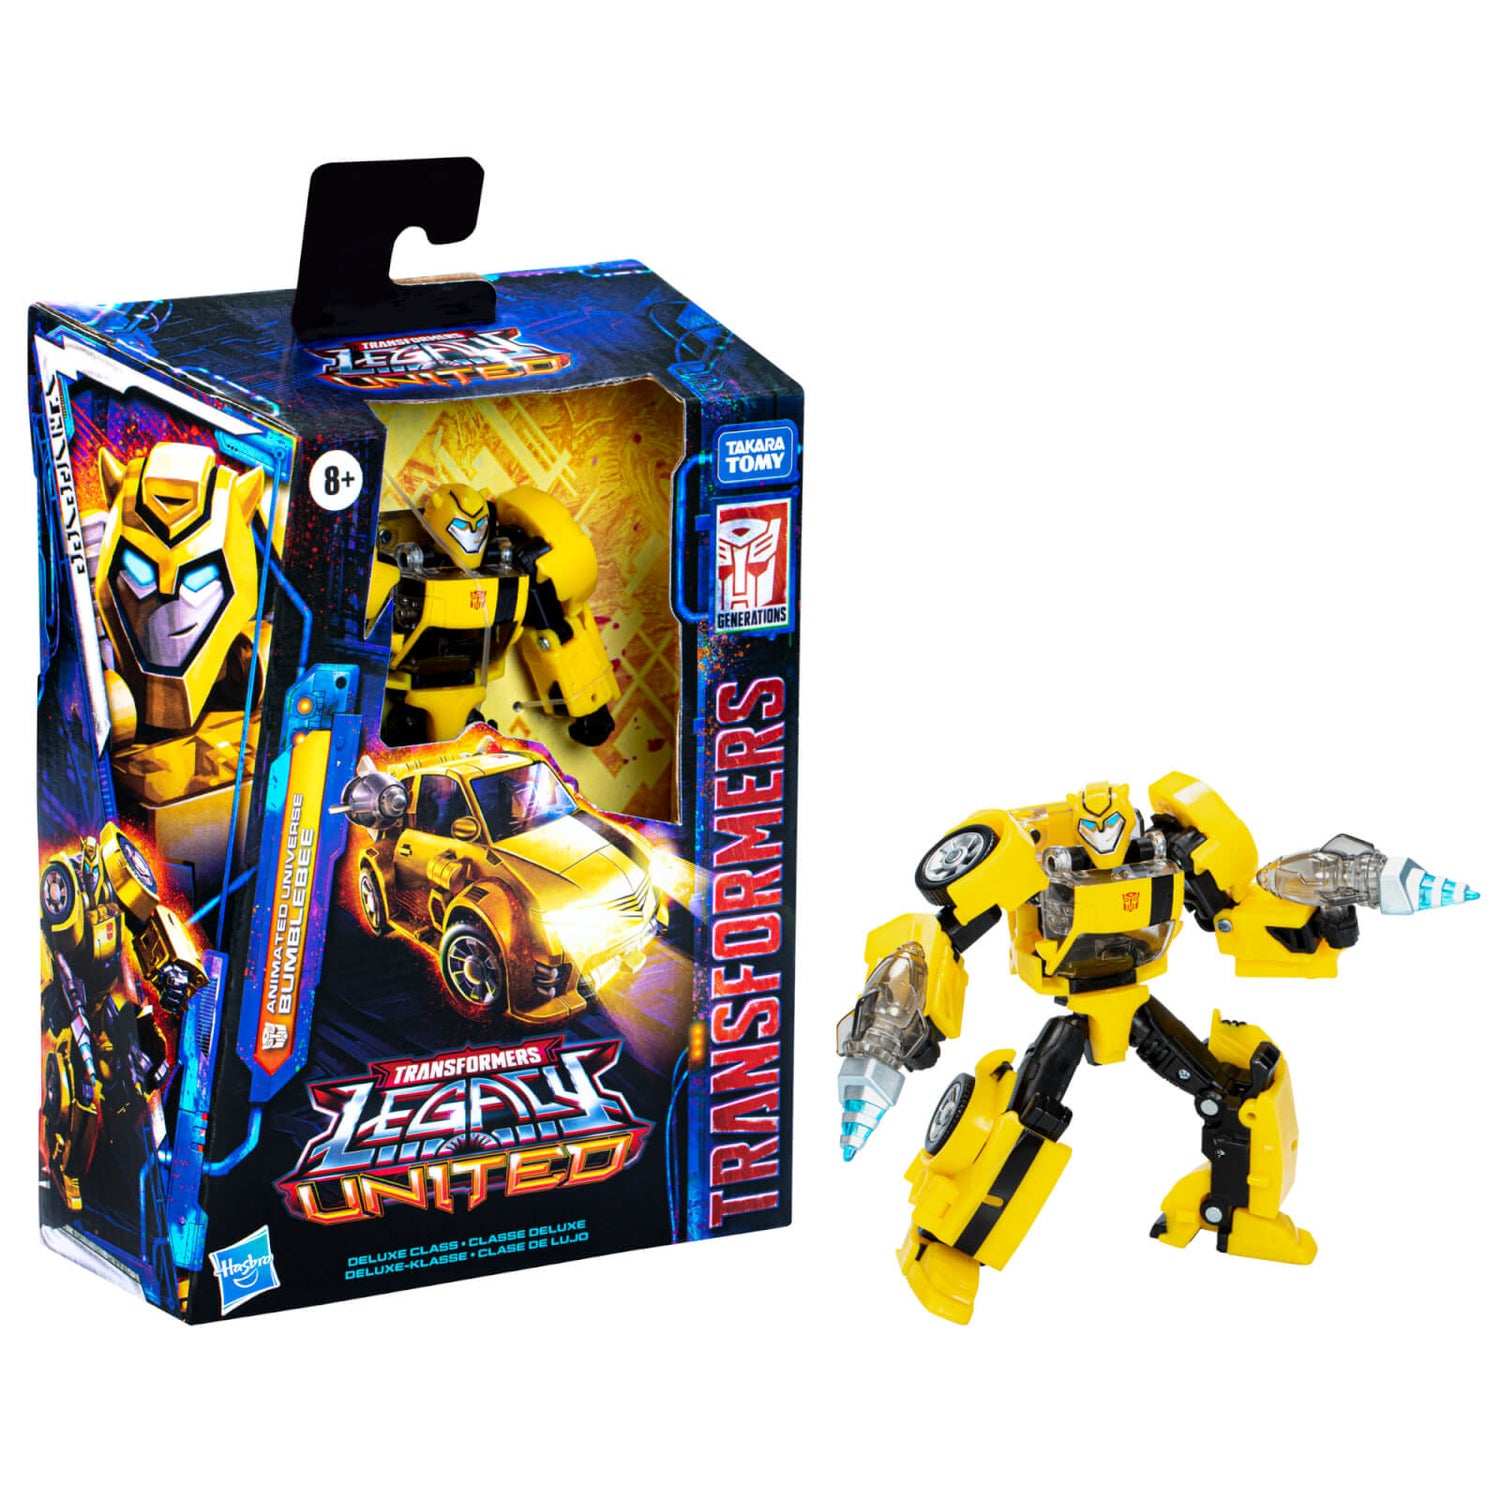 Hasbro Transformers Legacy United Deluxe Class Animated Universe Bumblebee